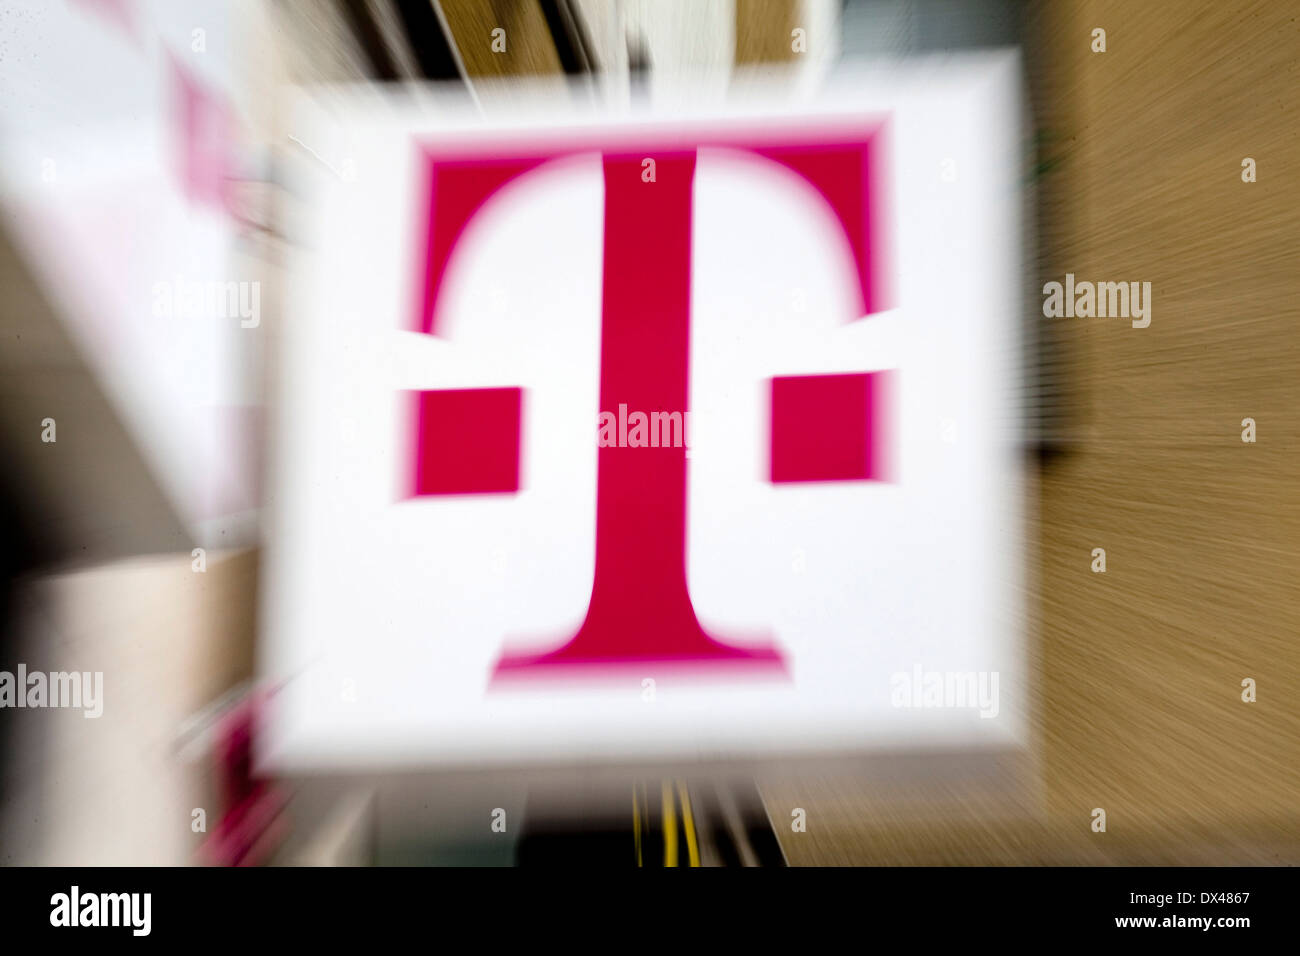 Logo telekom images - and Alamy hi-res photography stock